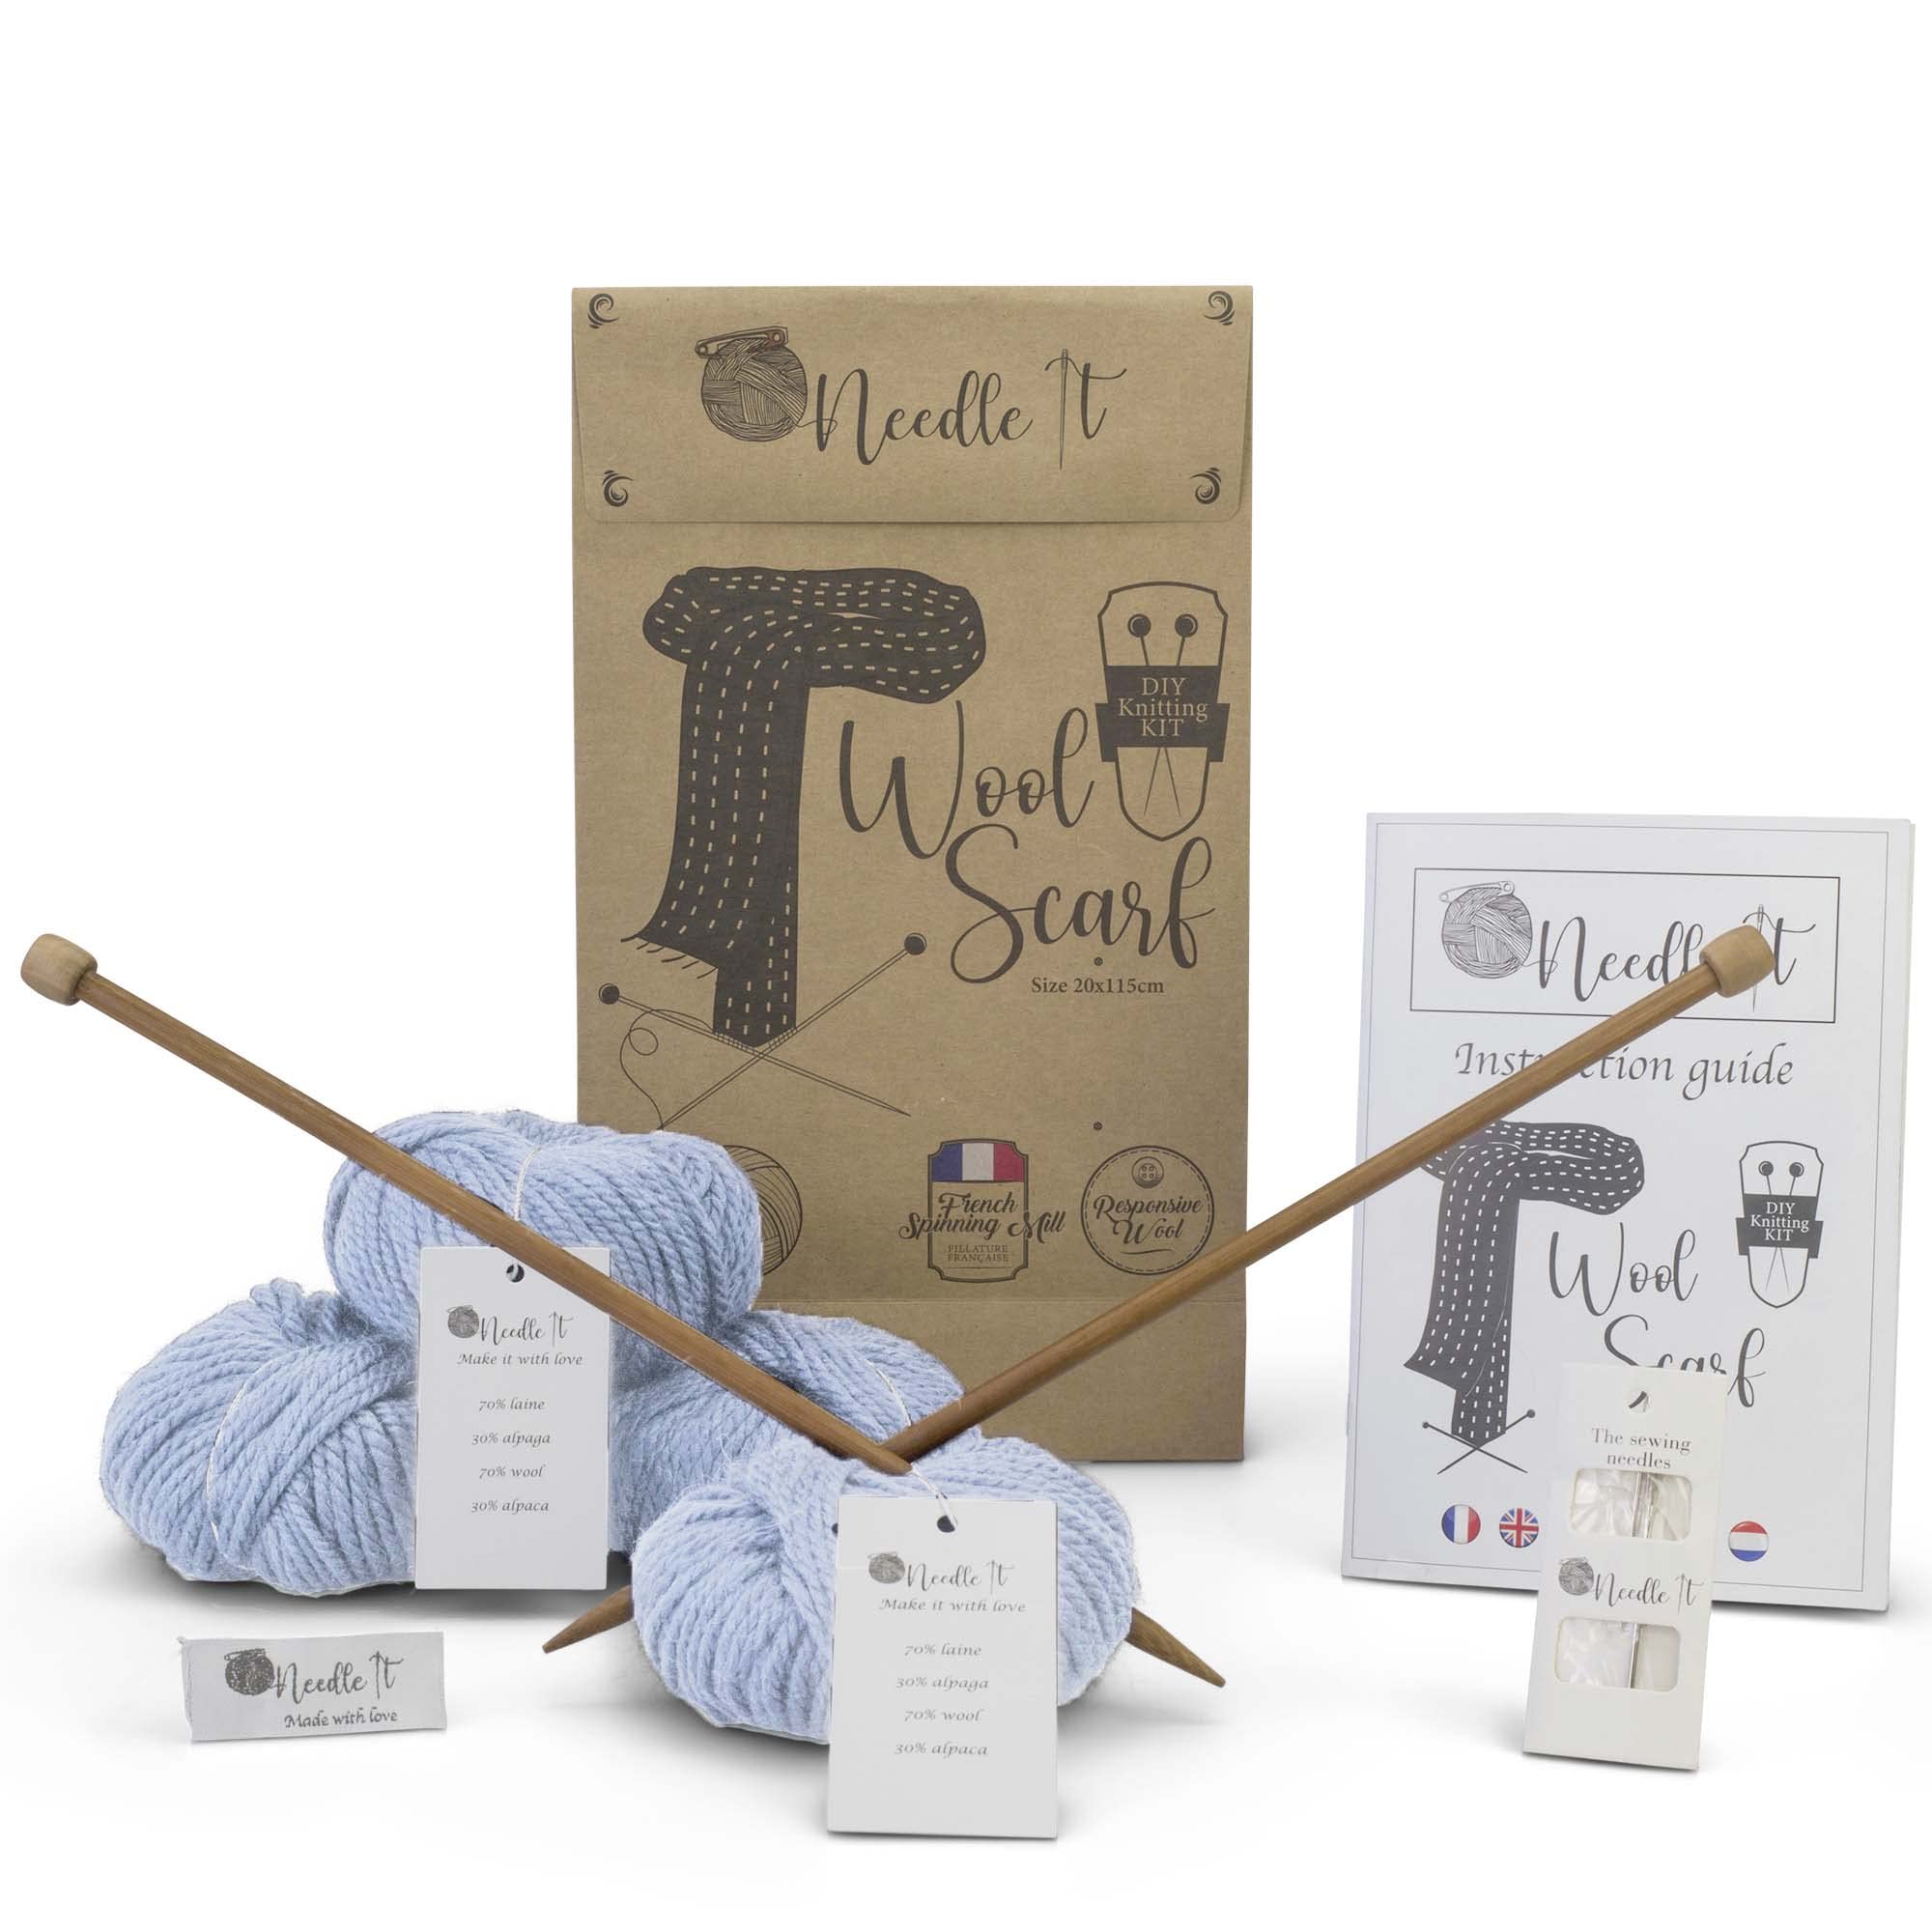 The Spinning Hand Learn to Knit Kit Best Knitting Kit for Beginners